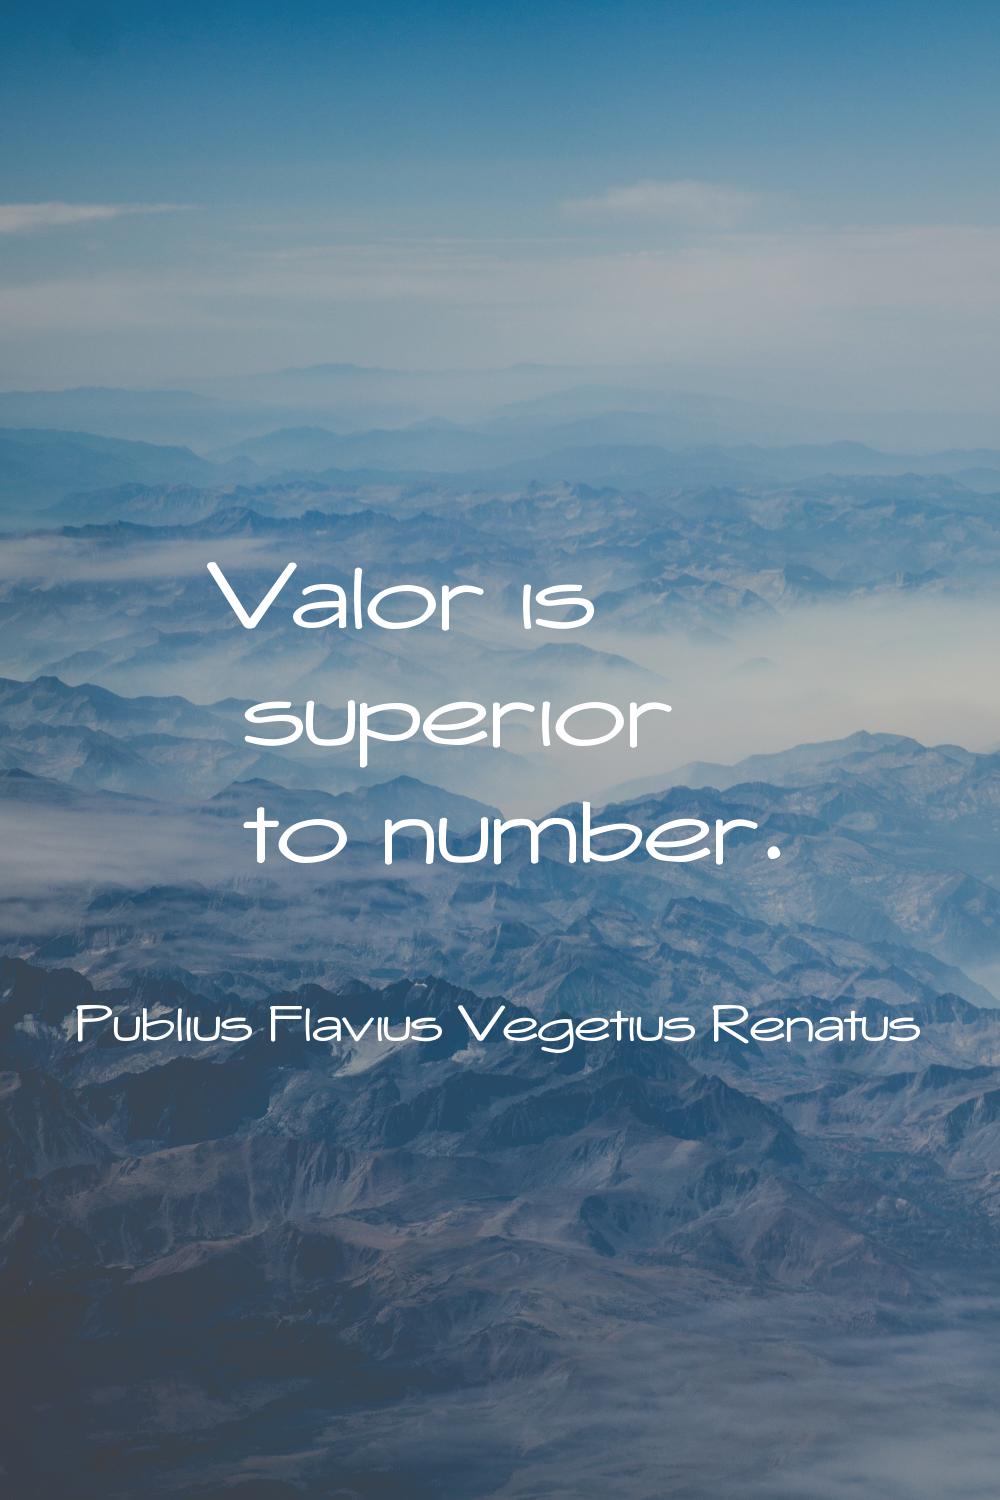 Valor is superior to number.